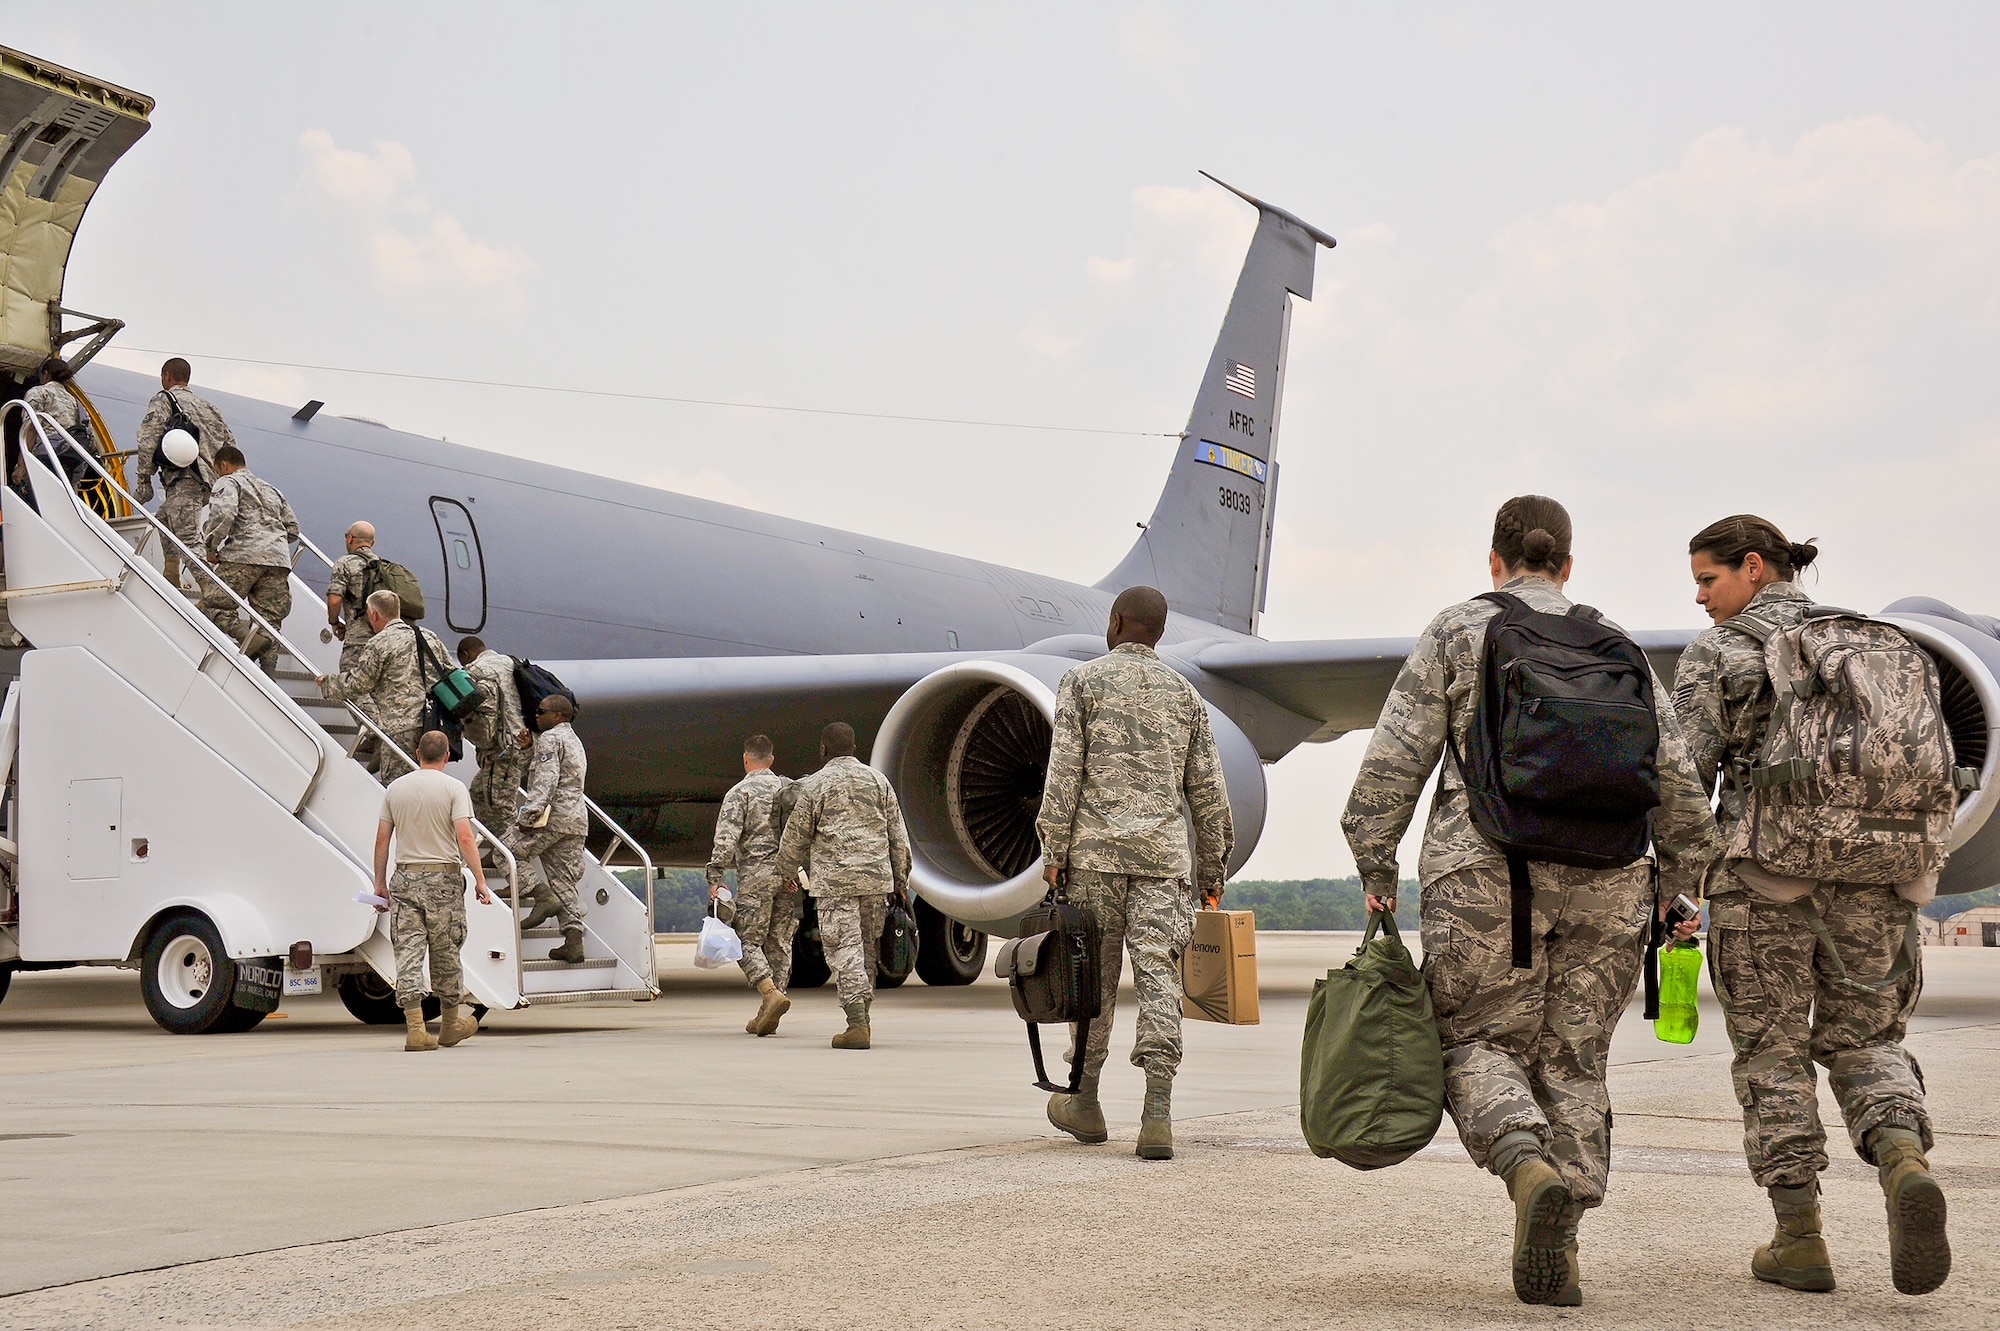 Members from the 116th Civil Engineering Squadron, Robins Air Force Base, Ga., board a KC-135 Stratotanker bound for Gallop, N.M., June 5, 2011.  The squadron deployed for training to Window Rock, Ariz. where they worked on a construction project for St. Michaels Association for Special Education on the Navajo Nation reservation.(U.S. Air Force photo by Master Sgt. Roger Parsons/Released)